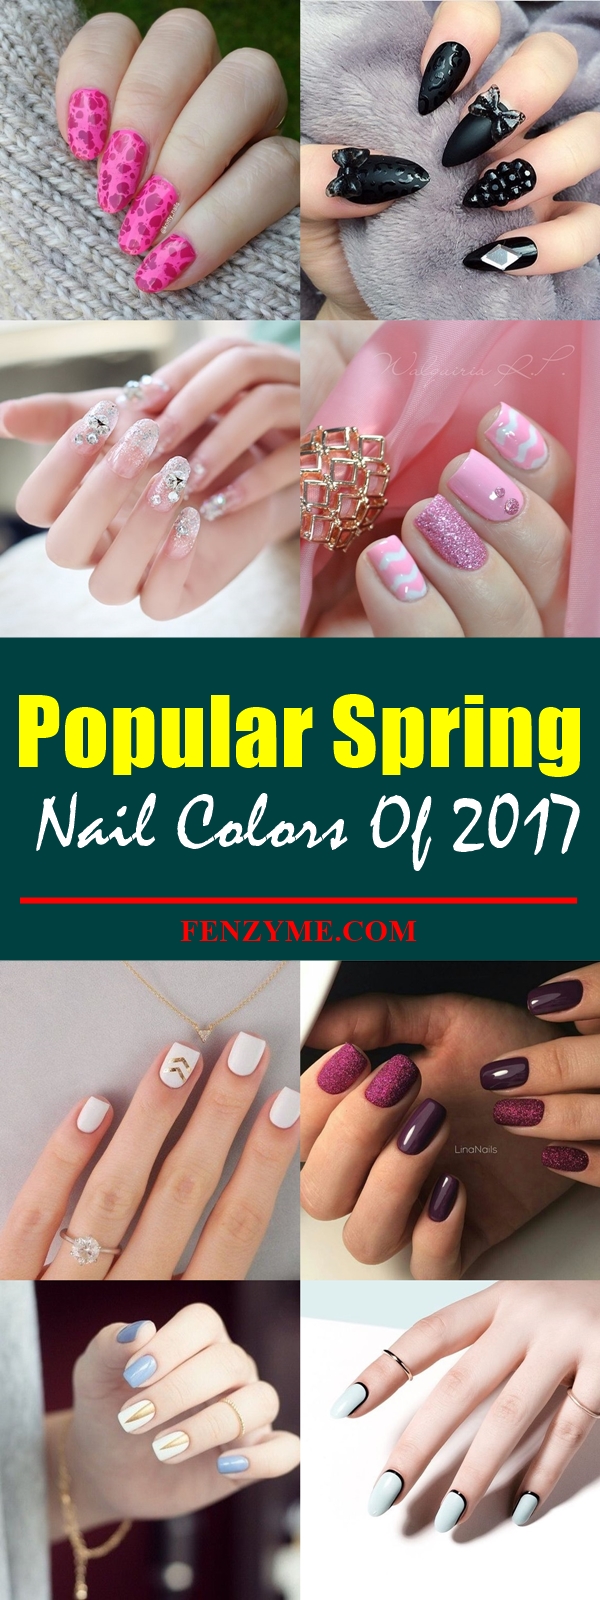 Popular Spring Nail Colors Of 2017 (31)